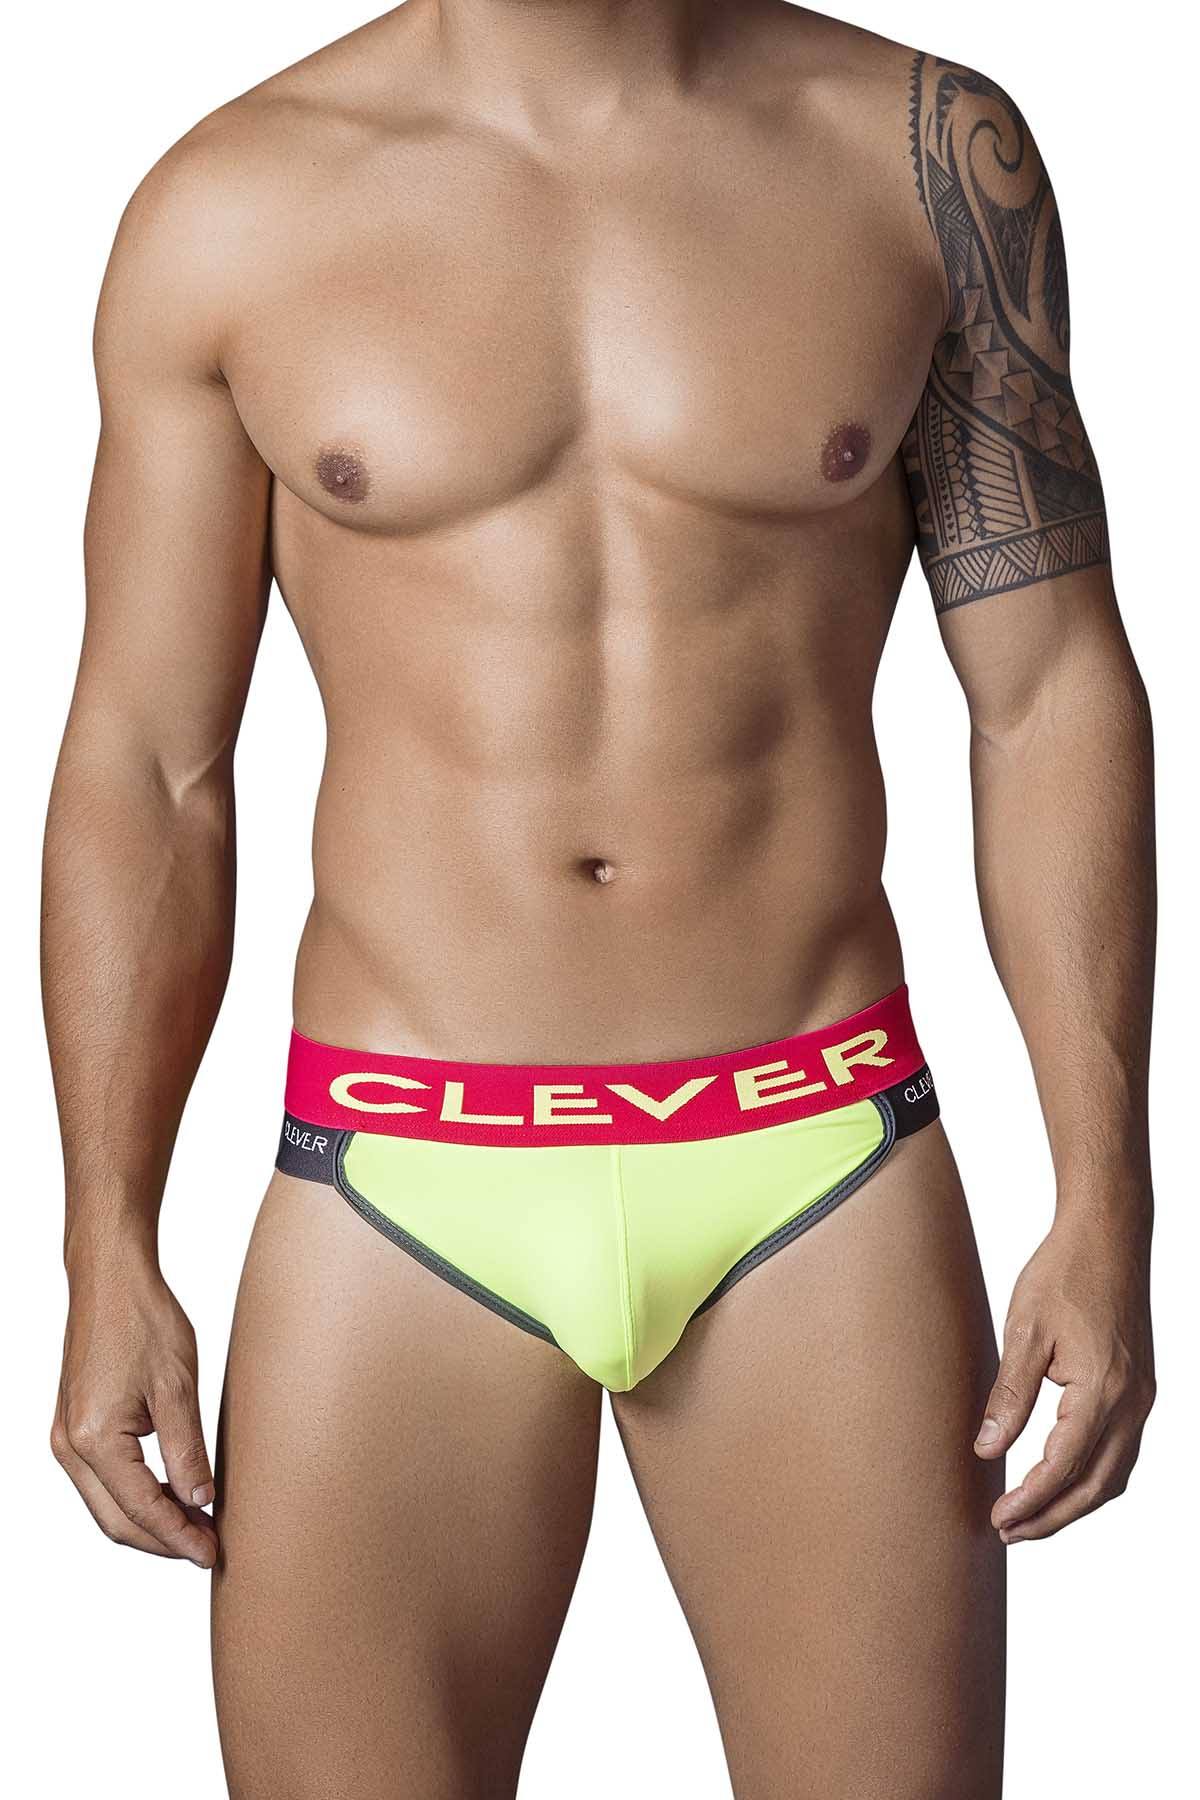 Clever Neon-Yellow Spaceman Brief